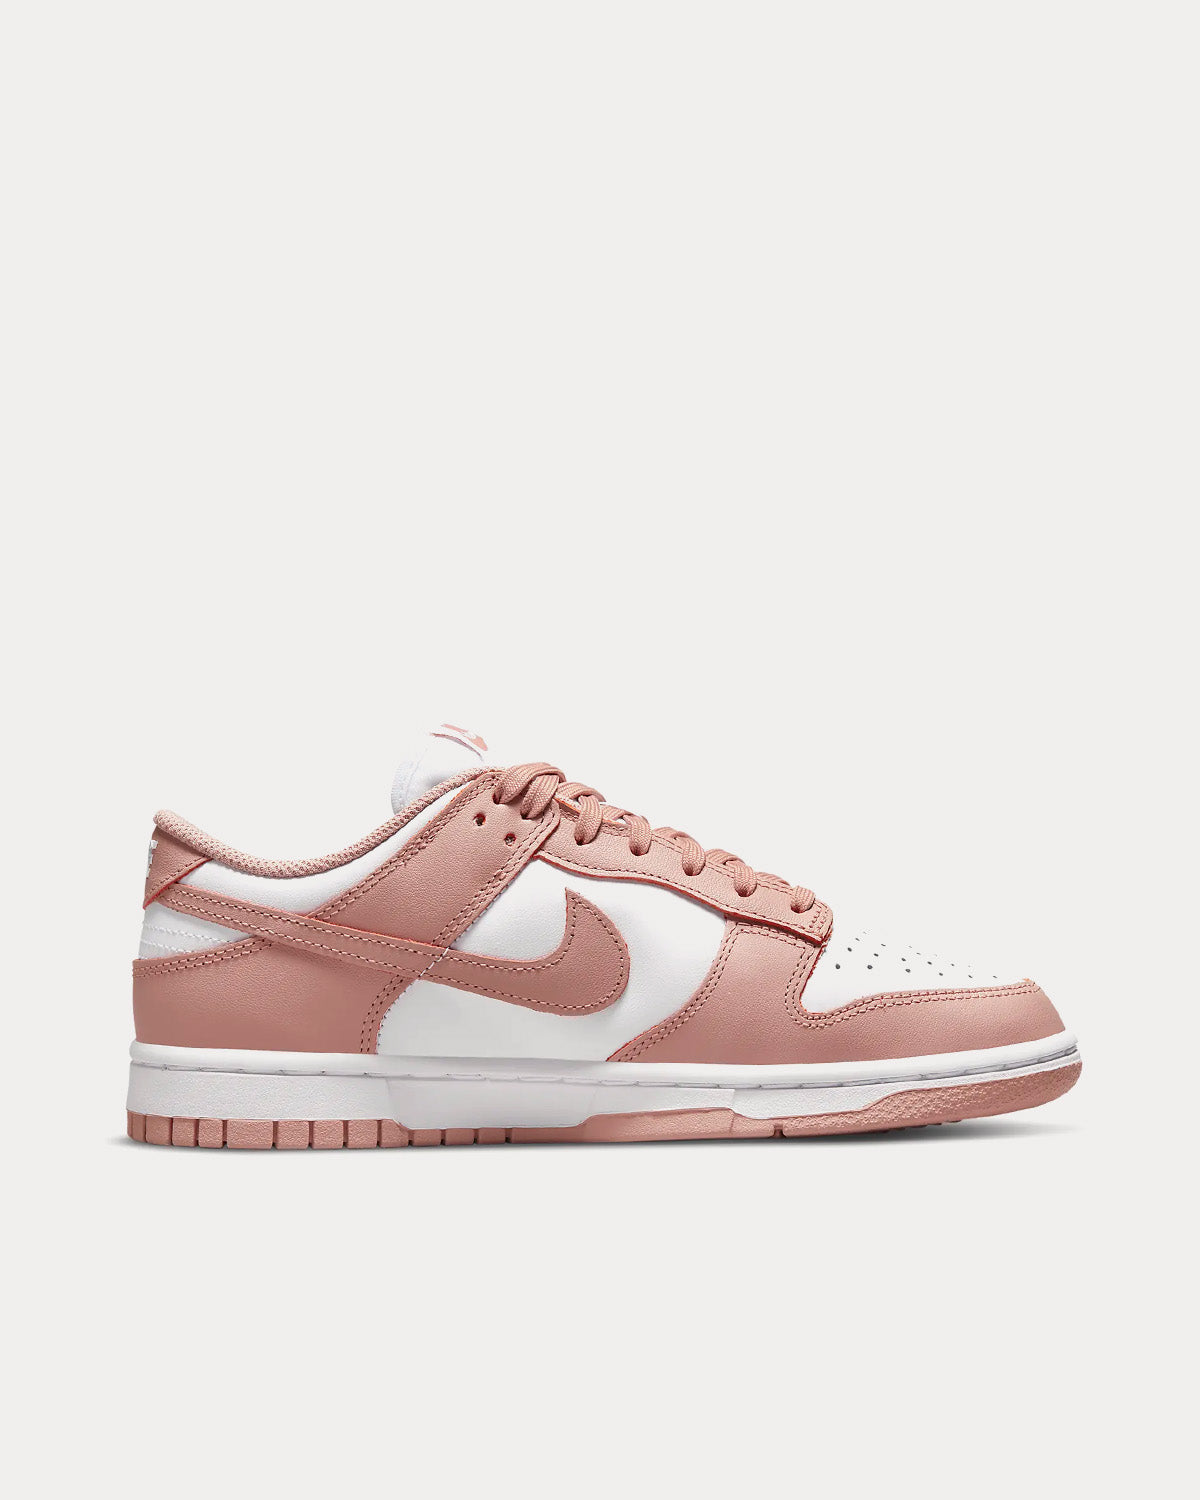 Nike Dunk Low White / White / Medium Olive Low Top Sneakers - Sneak in Peace